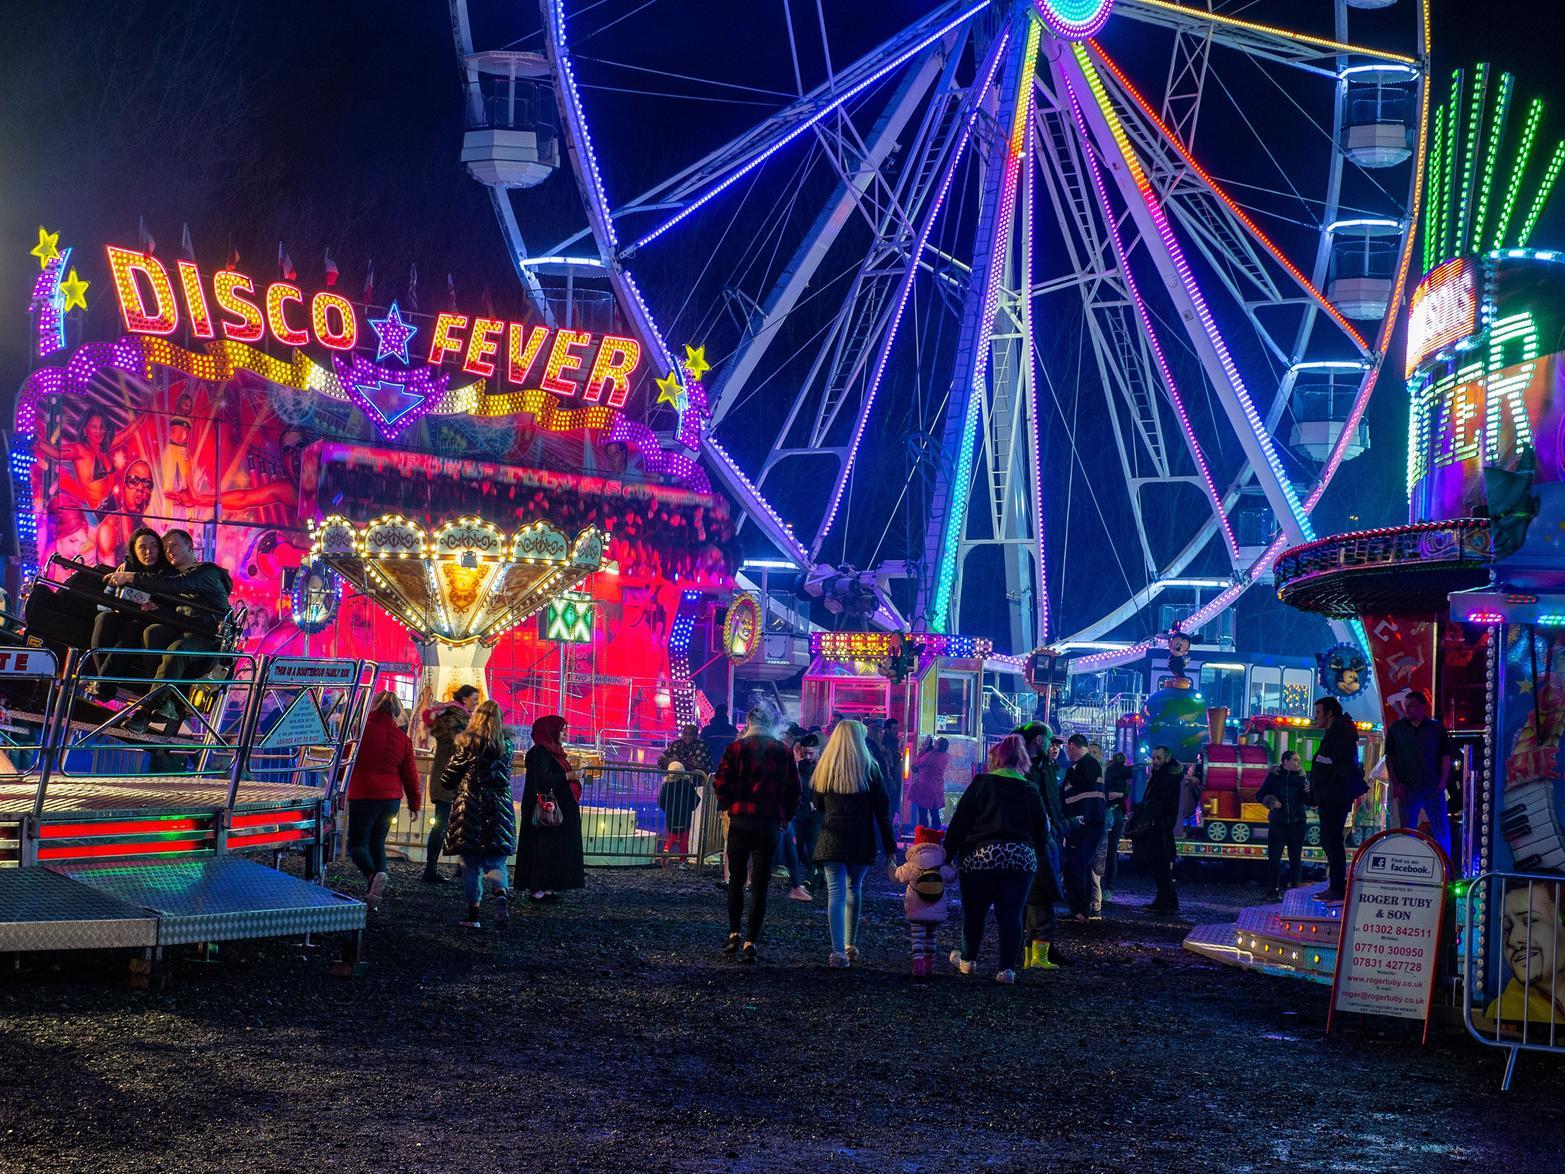 The fair boasts 70 attractions for visitors to enjoy.